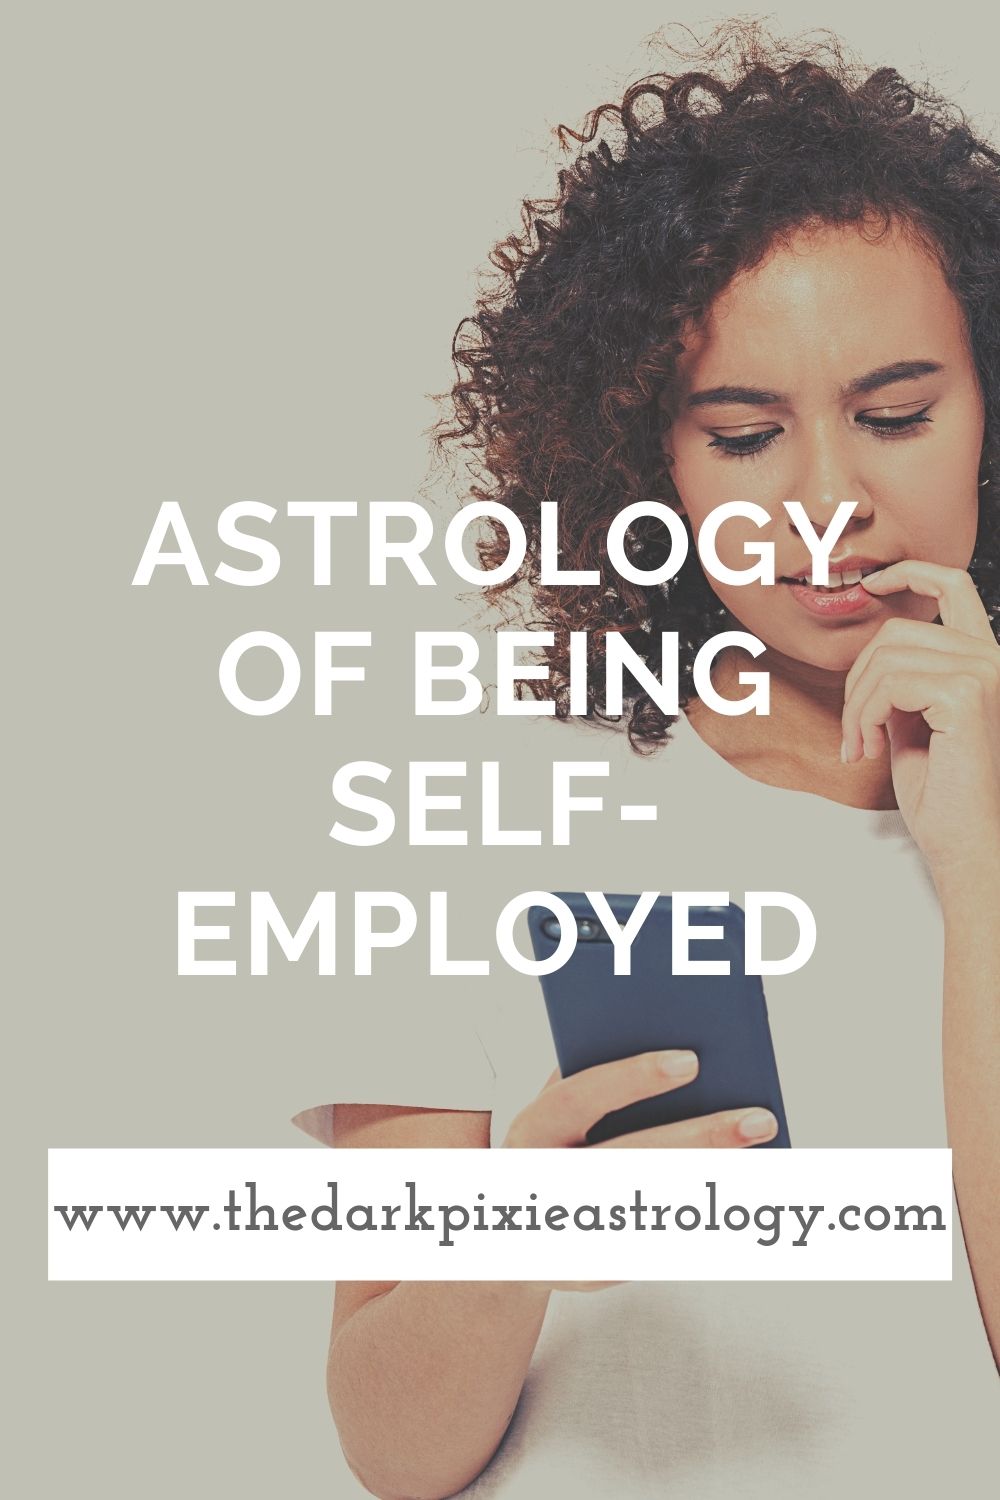 Astrology of Being Self-Employed - The Dark Pixie Astrology